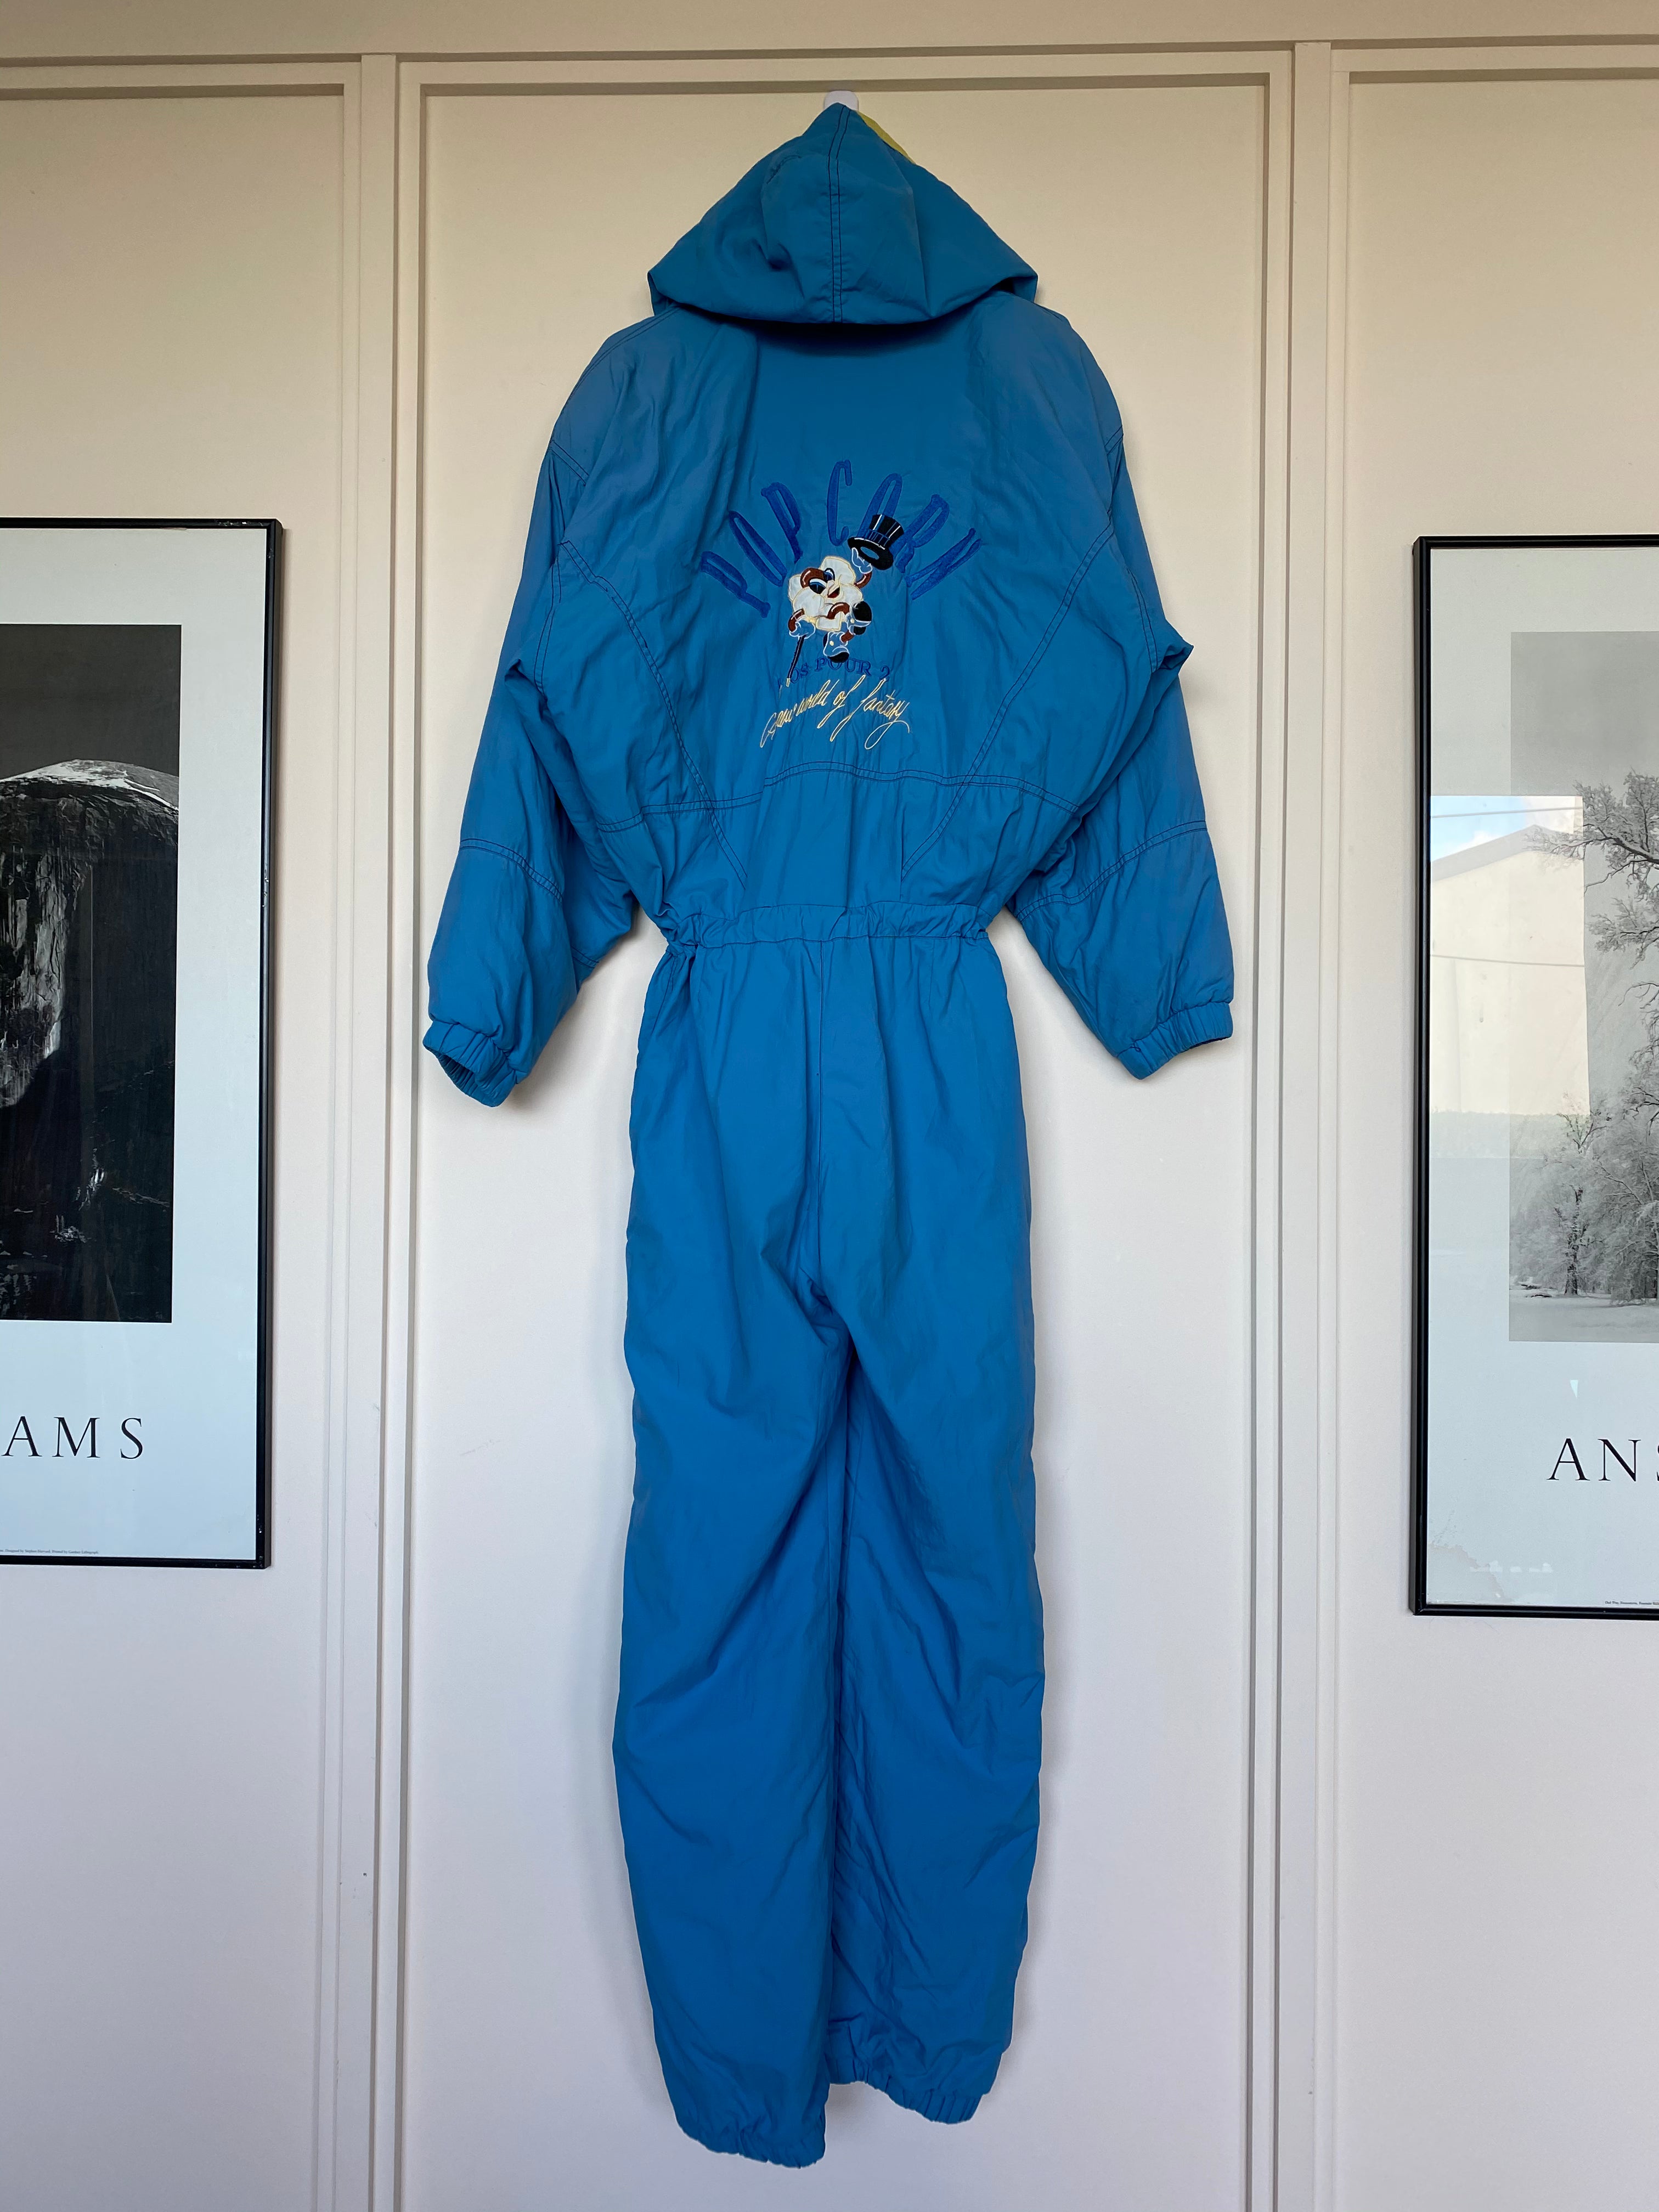 Vintage cornflower blue, with yellow and orange stripe "10S Pour 2" 1-piece snow suit with embroidery "Popcorn 10s Pour 2, A New World of Fantasy" on back shoulder and front right hand chest. Back